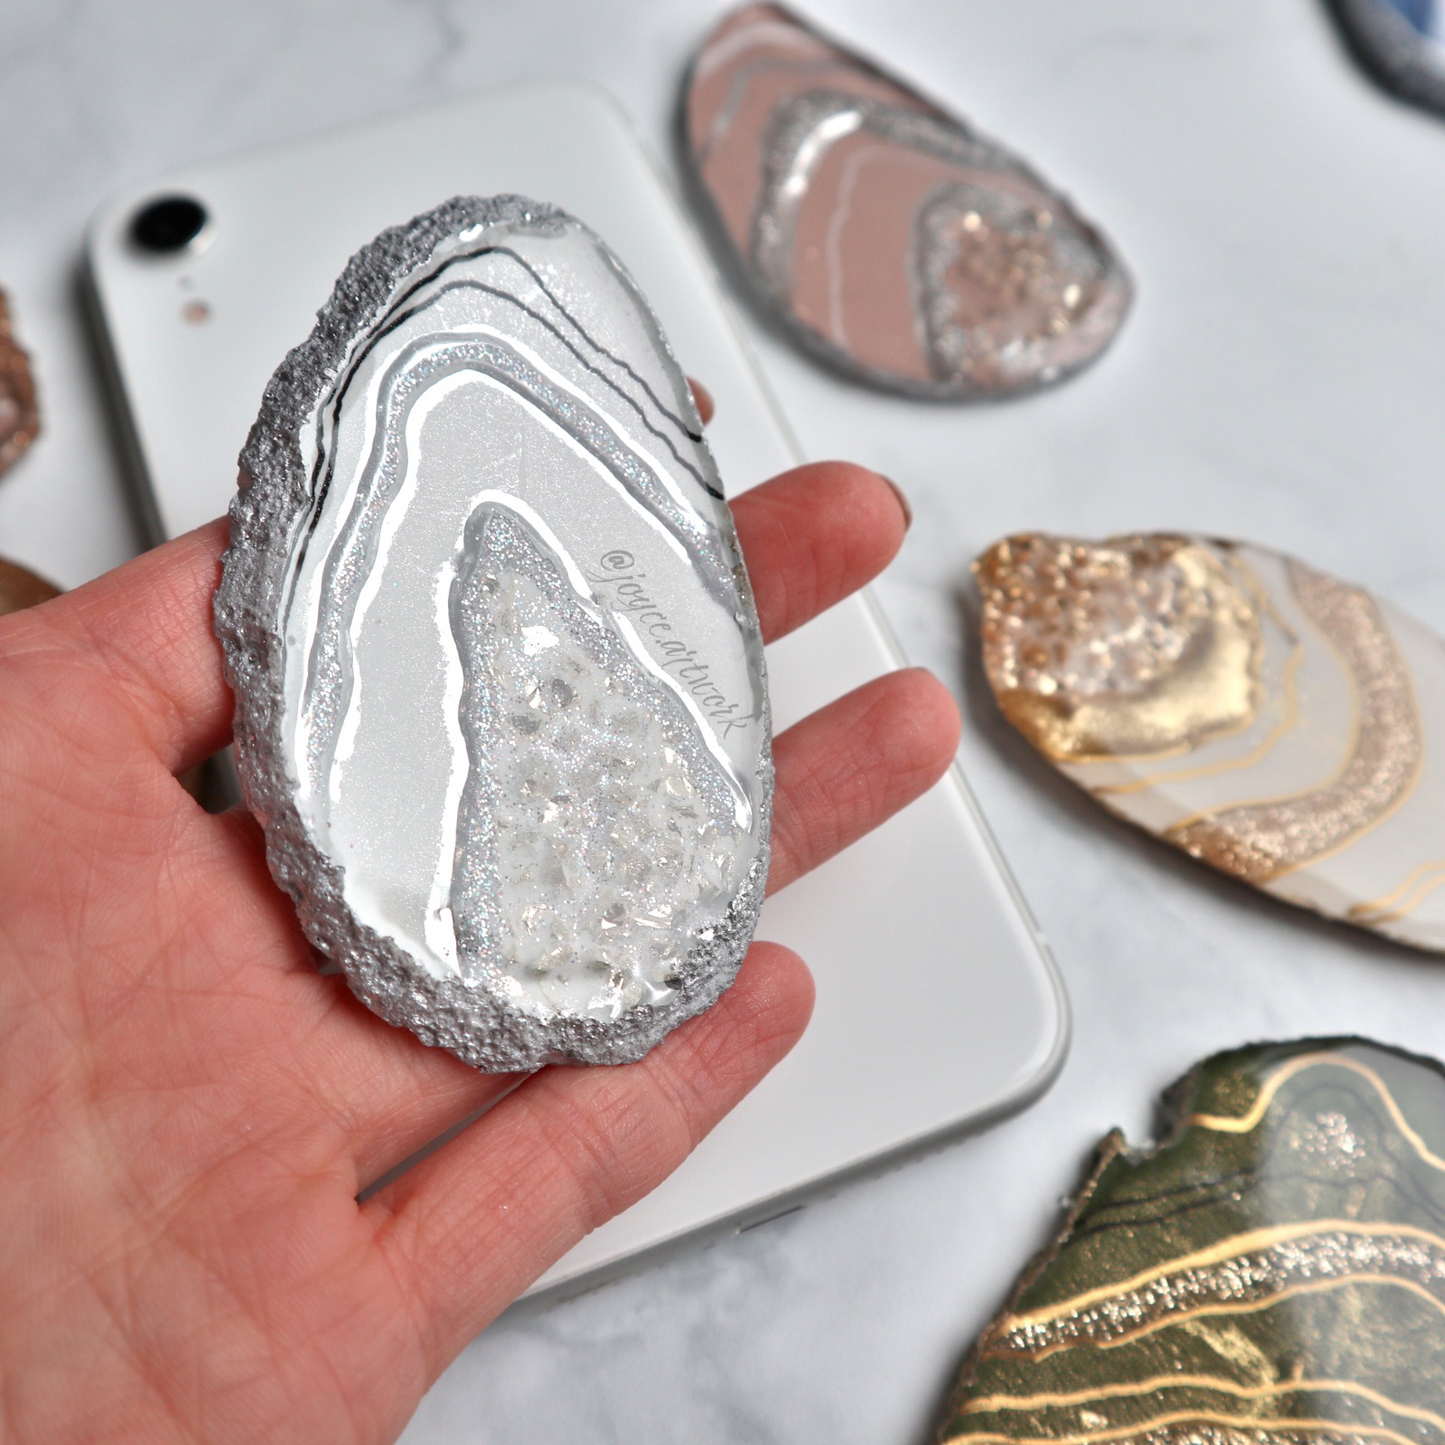 White and Silver Geode Slice Phone Grip